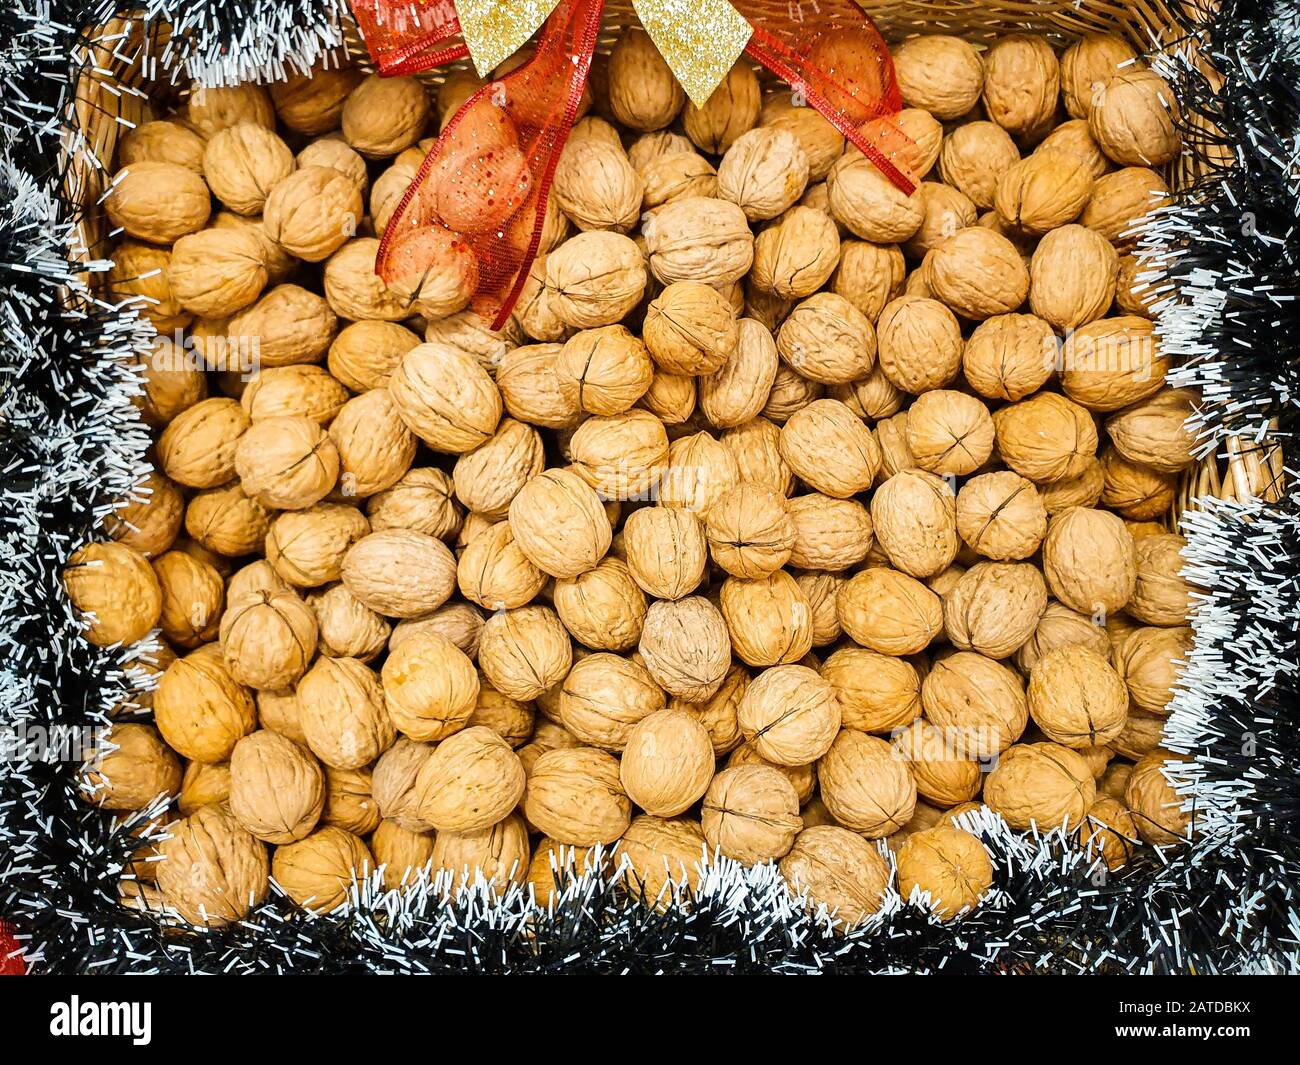 Walnuts in a Christmas basket Stock Photo